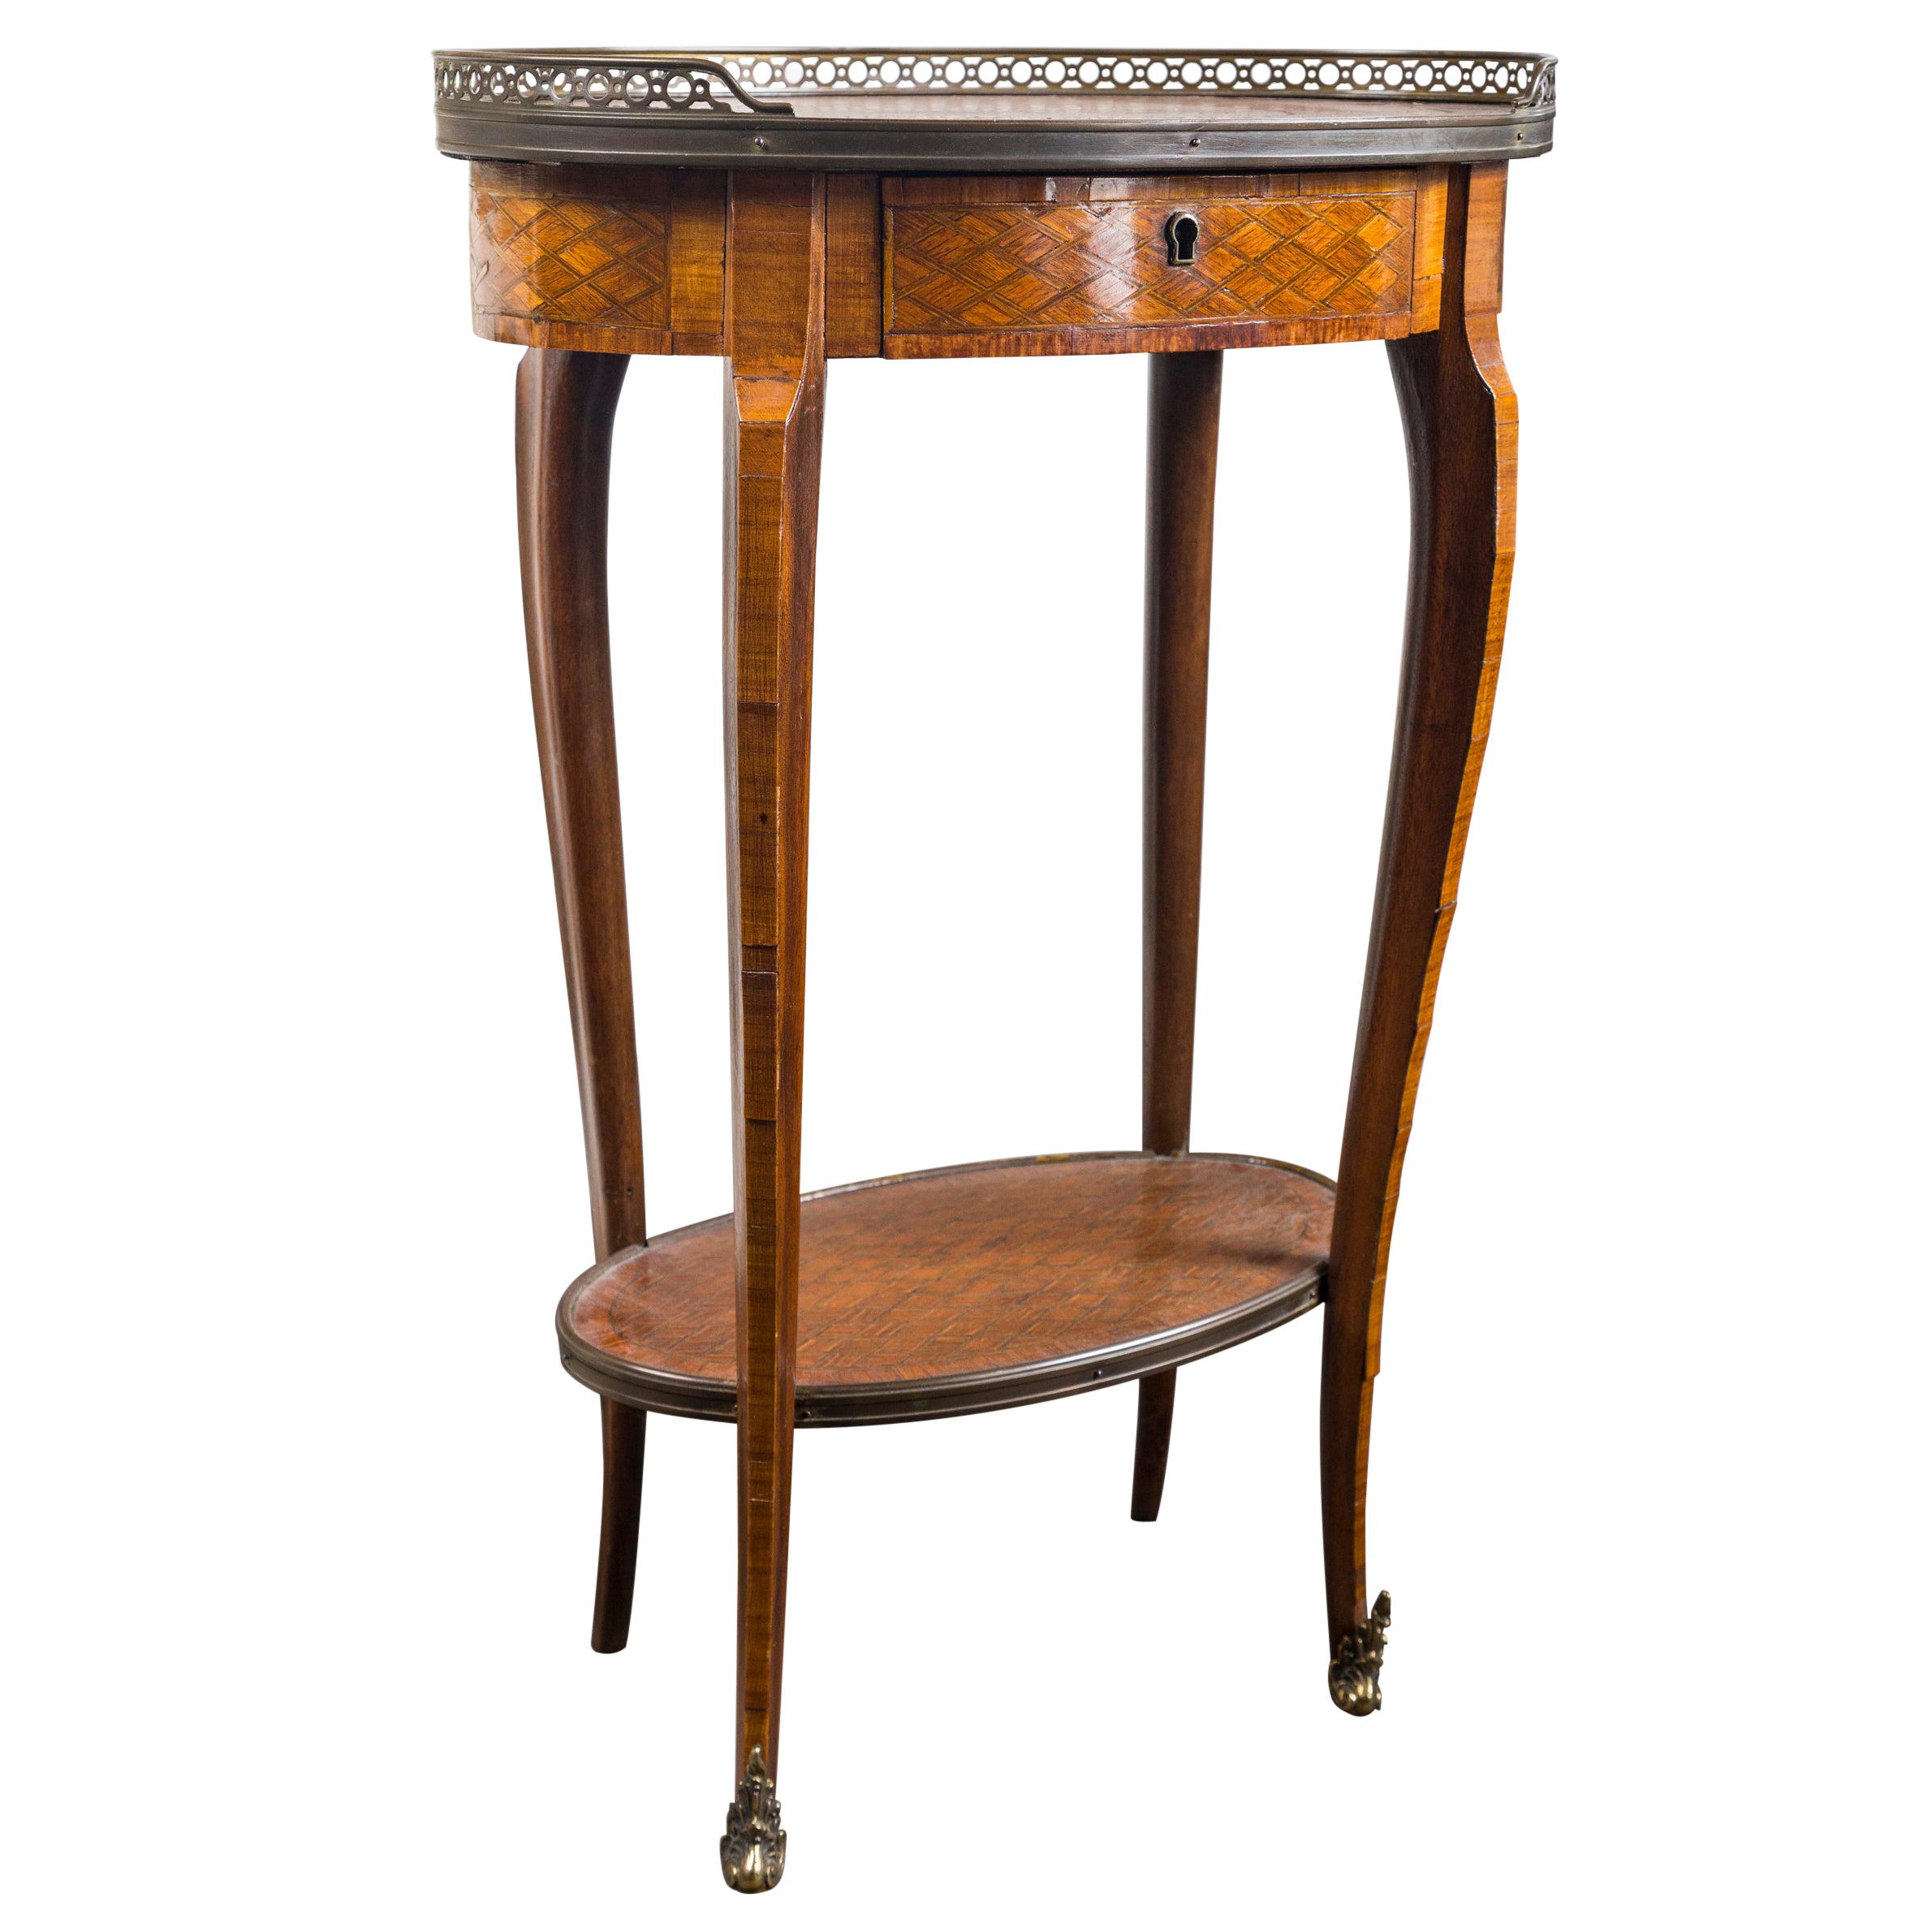 19th Century French Bronze Mounted Parquetry Side Table